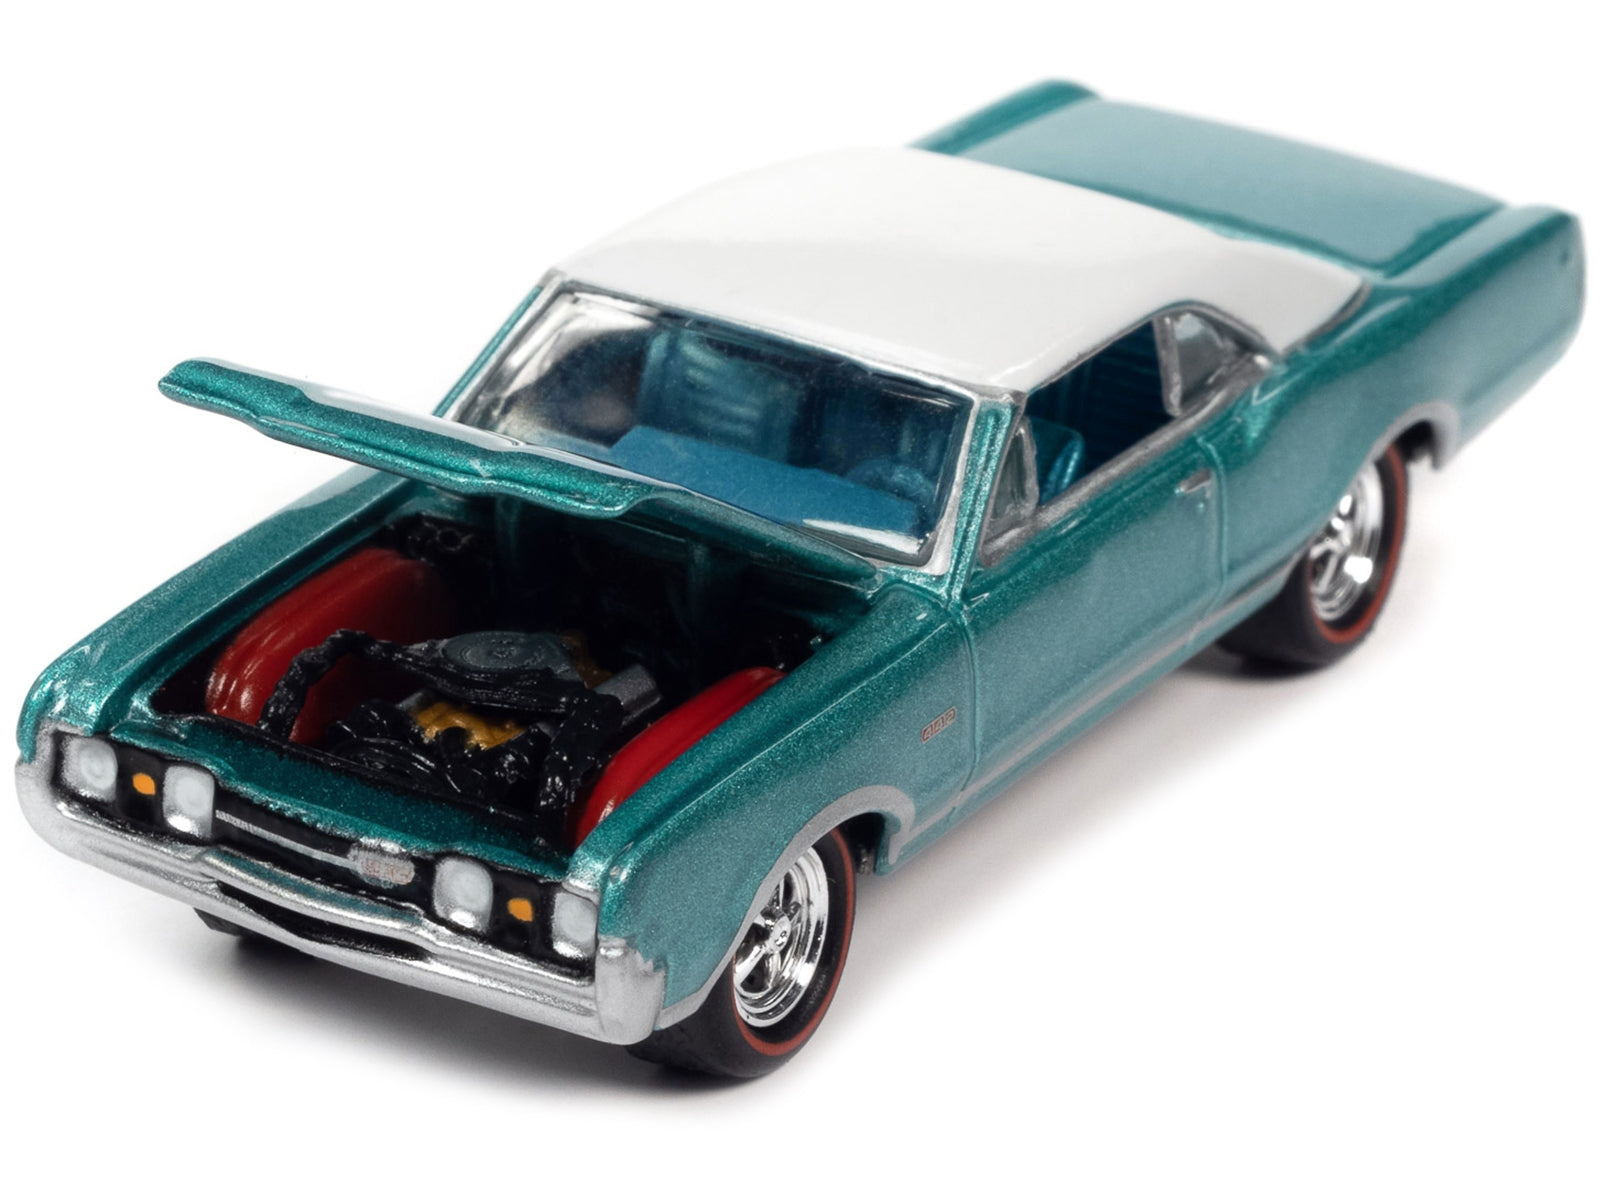 1967 Oldsmobile 442 W-30 Aquamarine Metallic with White Top "MCACN (Muscle Car and Corvette Nationals)" Limited Edition to 4164 pieces Worldwide "Muscle Cars USA" Series 1/64 Diecast Model Car by Johnny Lightning Johnny Lightning